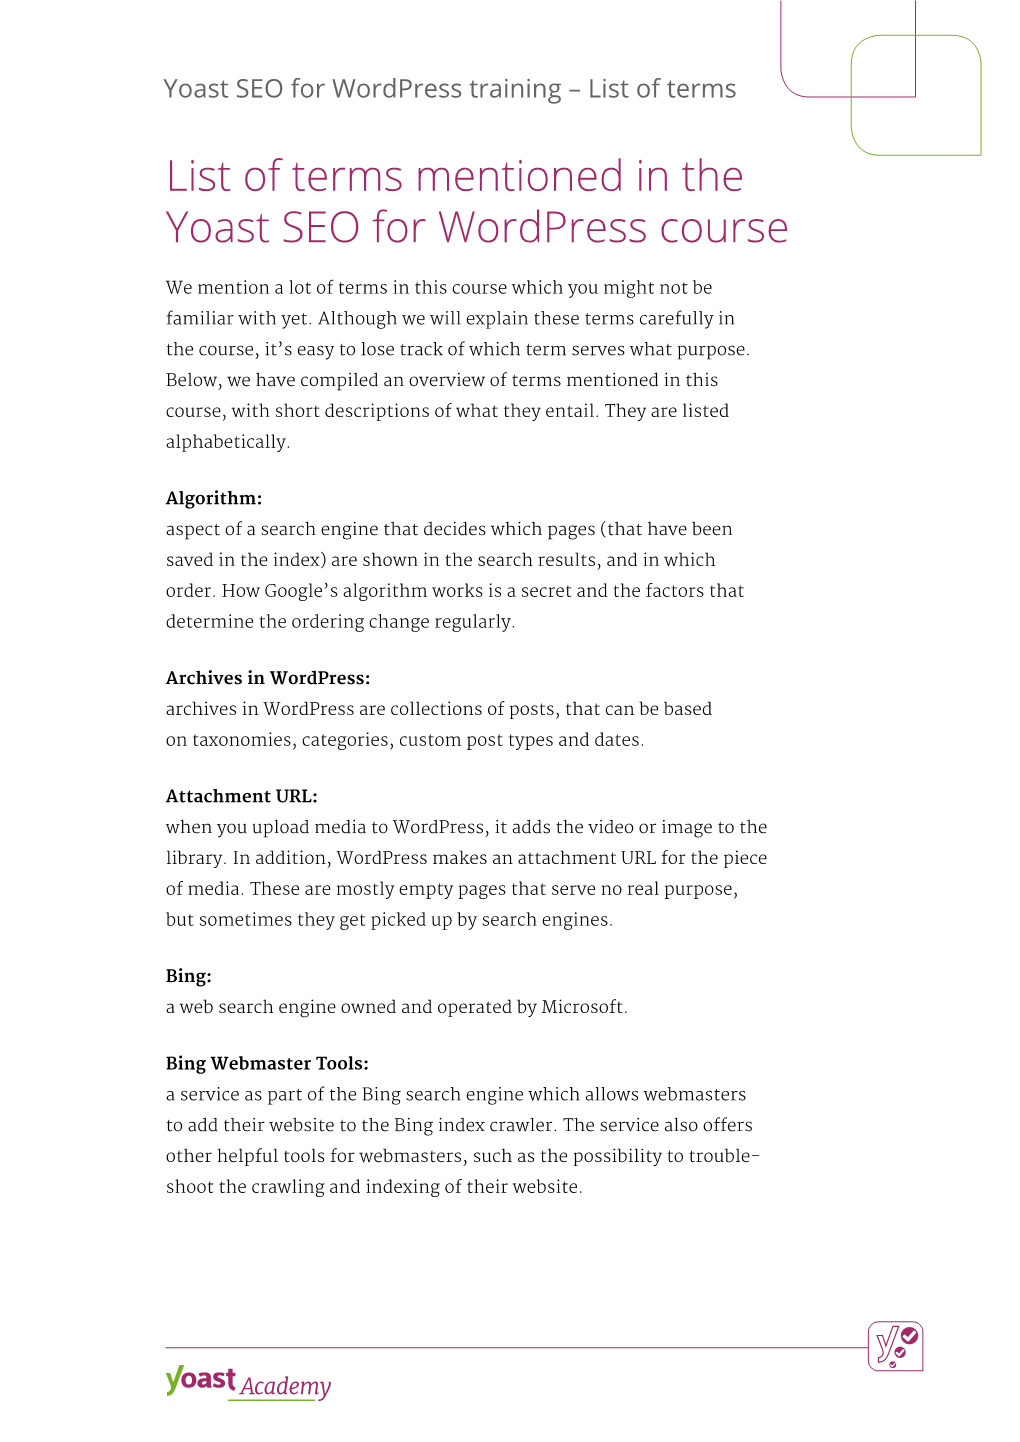 List of Terms Mentioned in the Yoast SEO for Wordpress Course